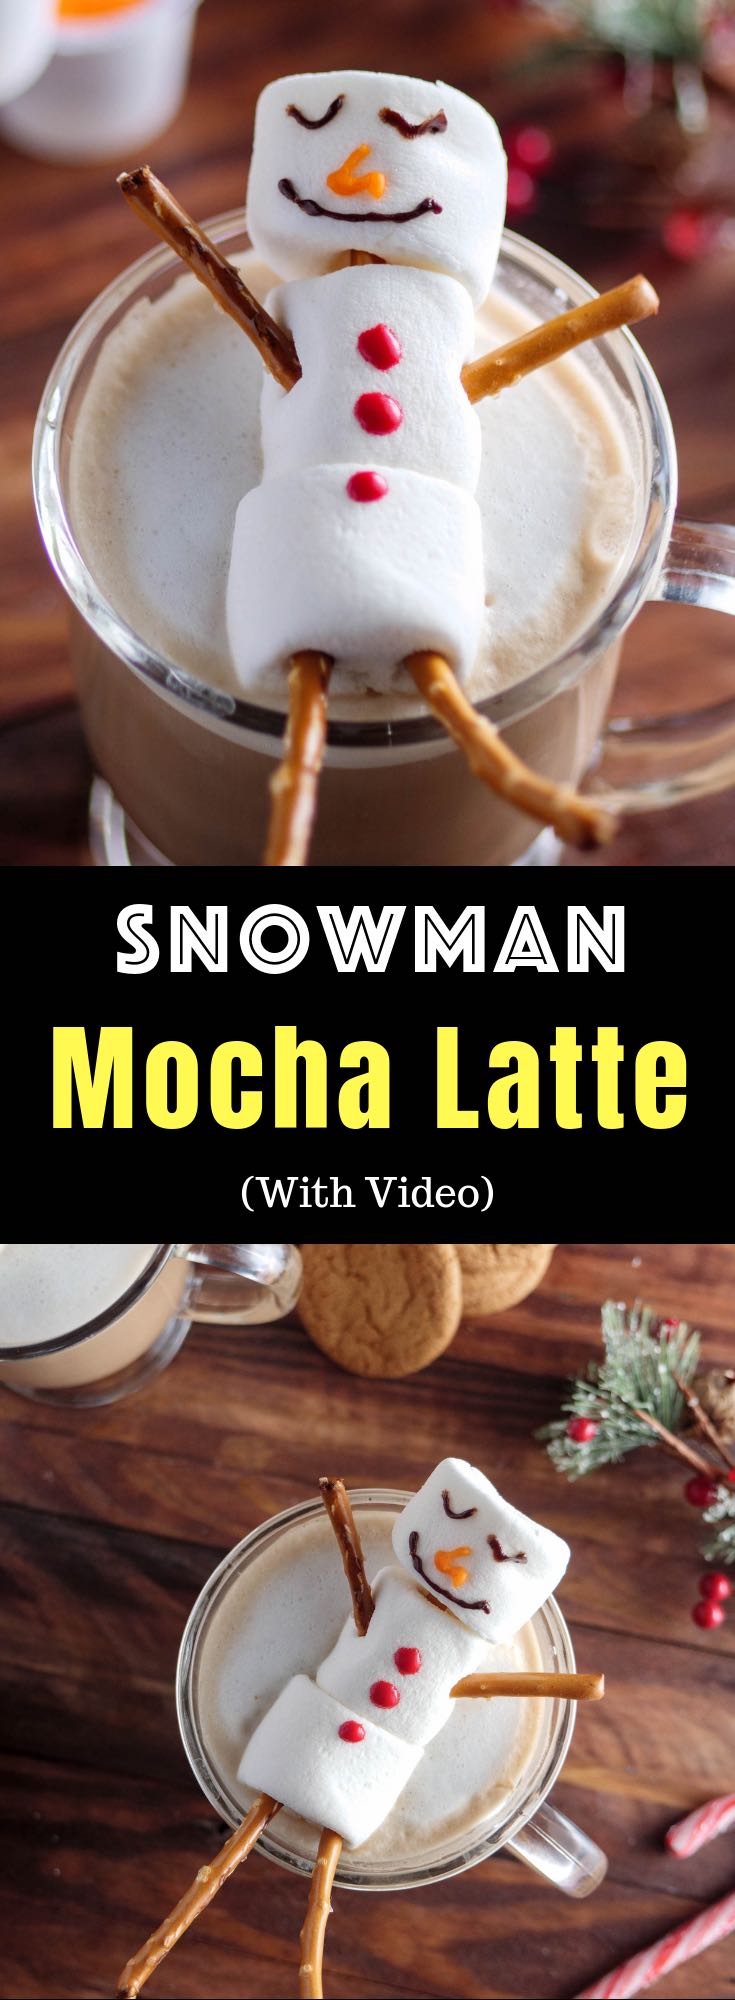 A Snowman Mocha Latte is an easy hot drink to serve your guests during the holiday season, and you can make it in minutes using Dunkin' Donuts K-cup pods from @Walmart and a few simple ingredients like cocoa, milk, marshmallows and decorating gel. Perfect for parties, kids activities. #DunkinYouBrewYou #ad